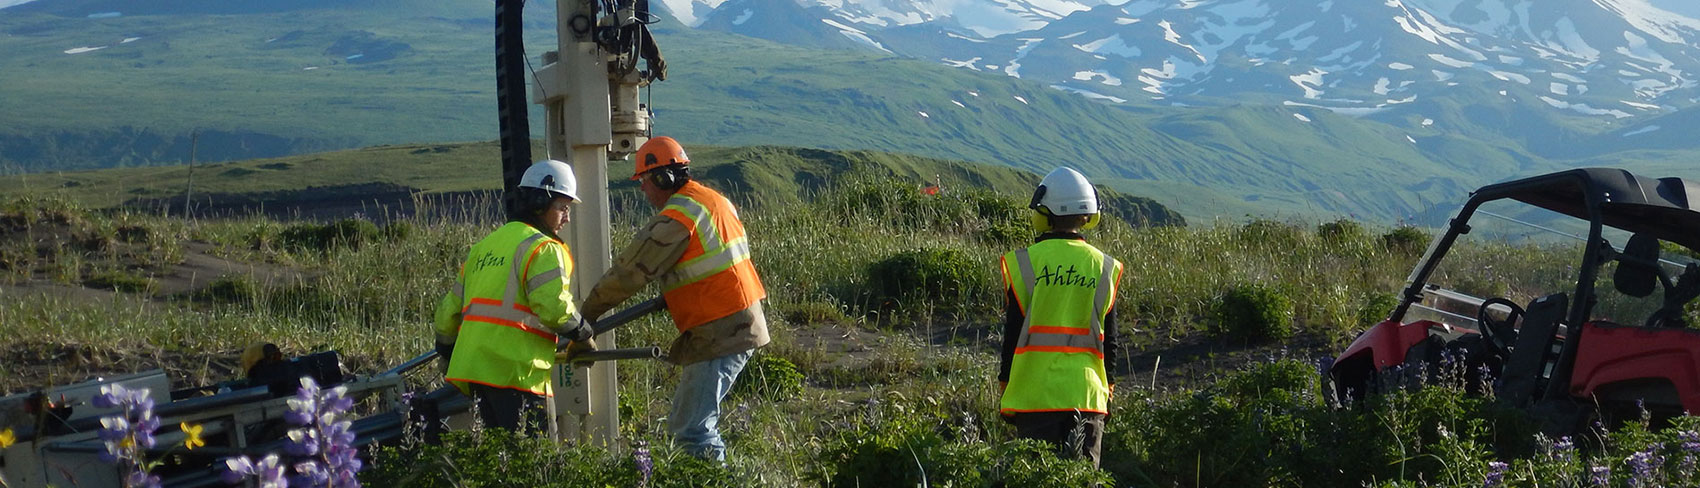 Workers fix a drill in the middle of the Alaska tundra with mountains in the background.